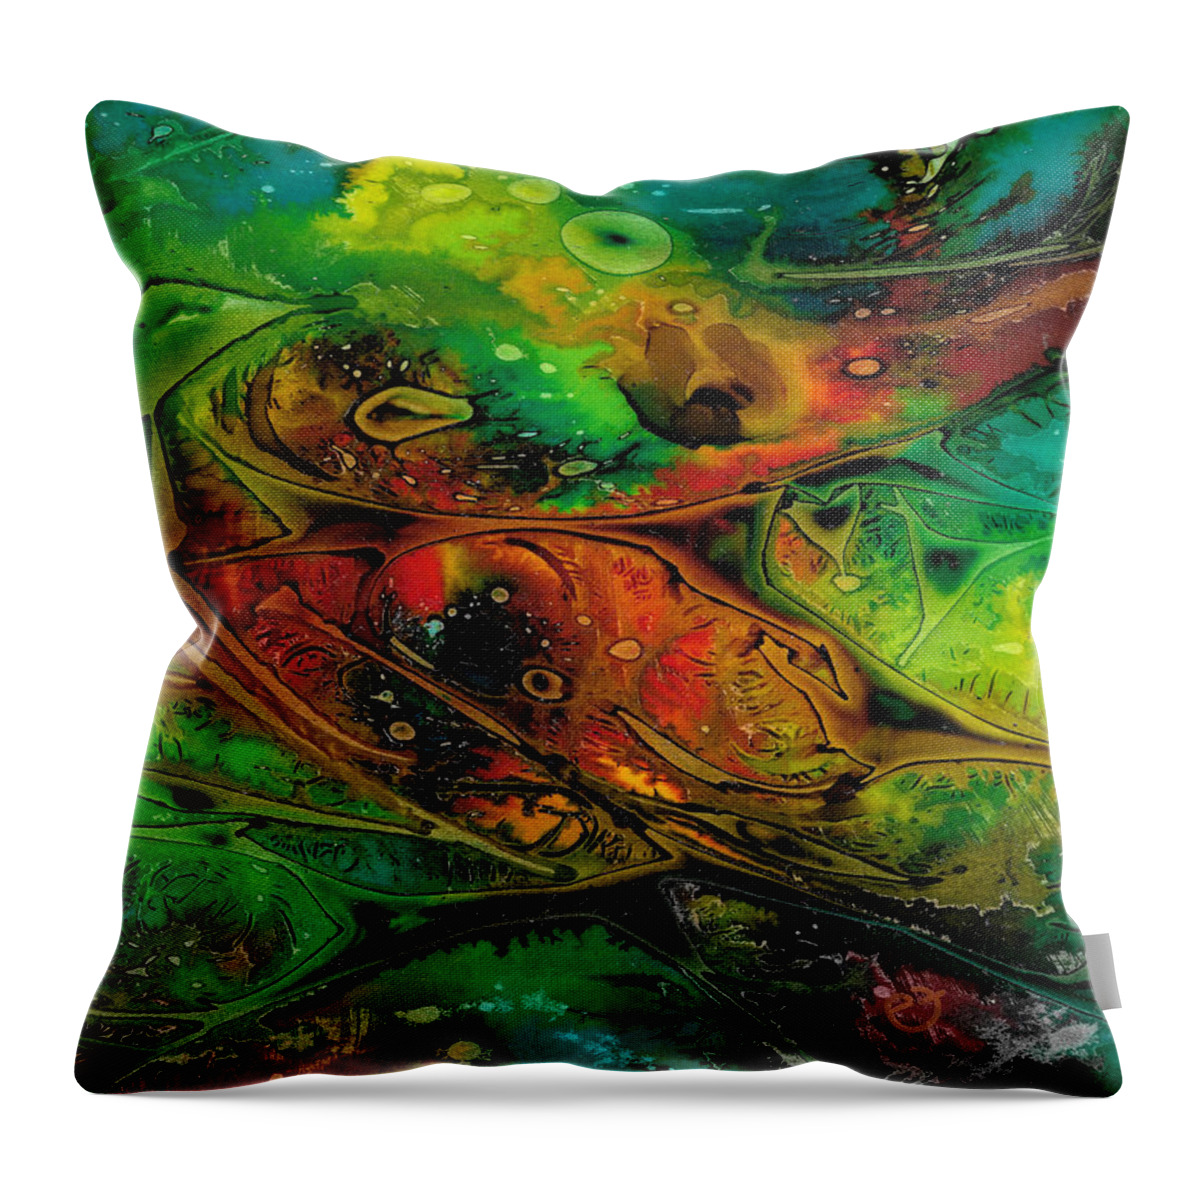 Colour Throw Pillow featuring the painting Habitat Paradigm by Eli Tynan